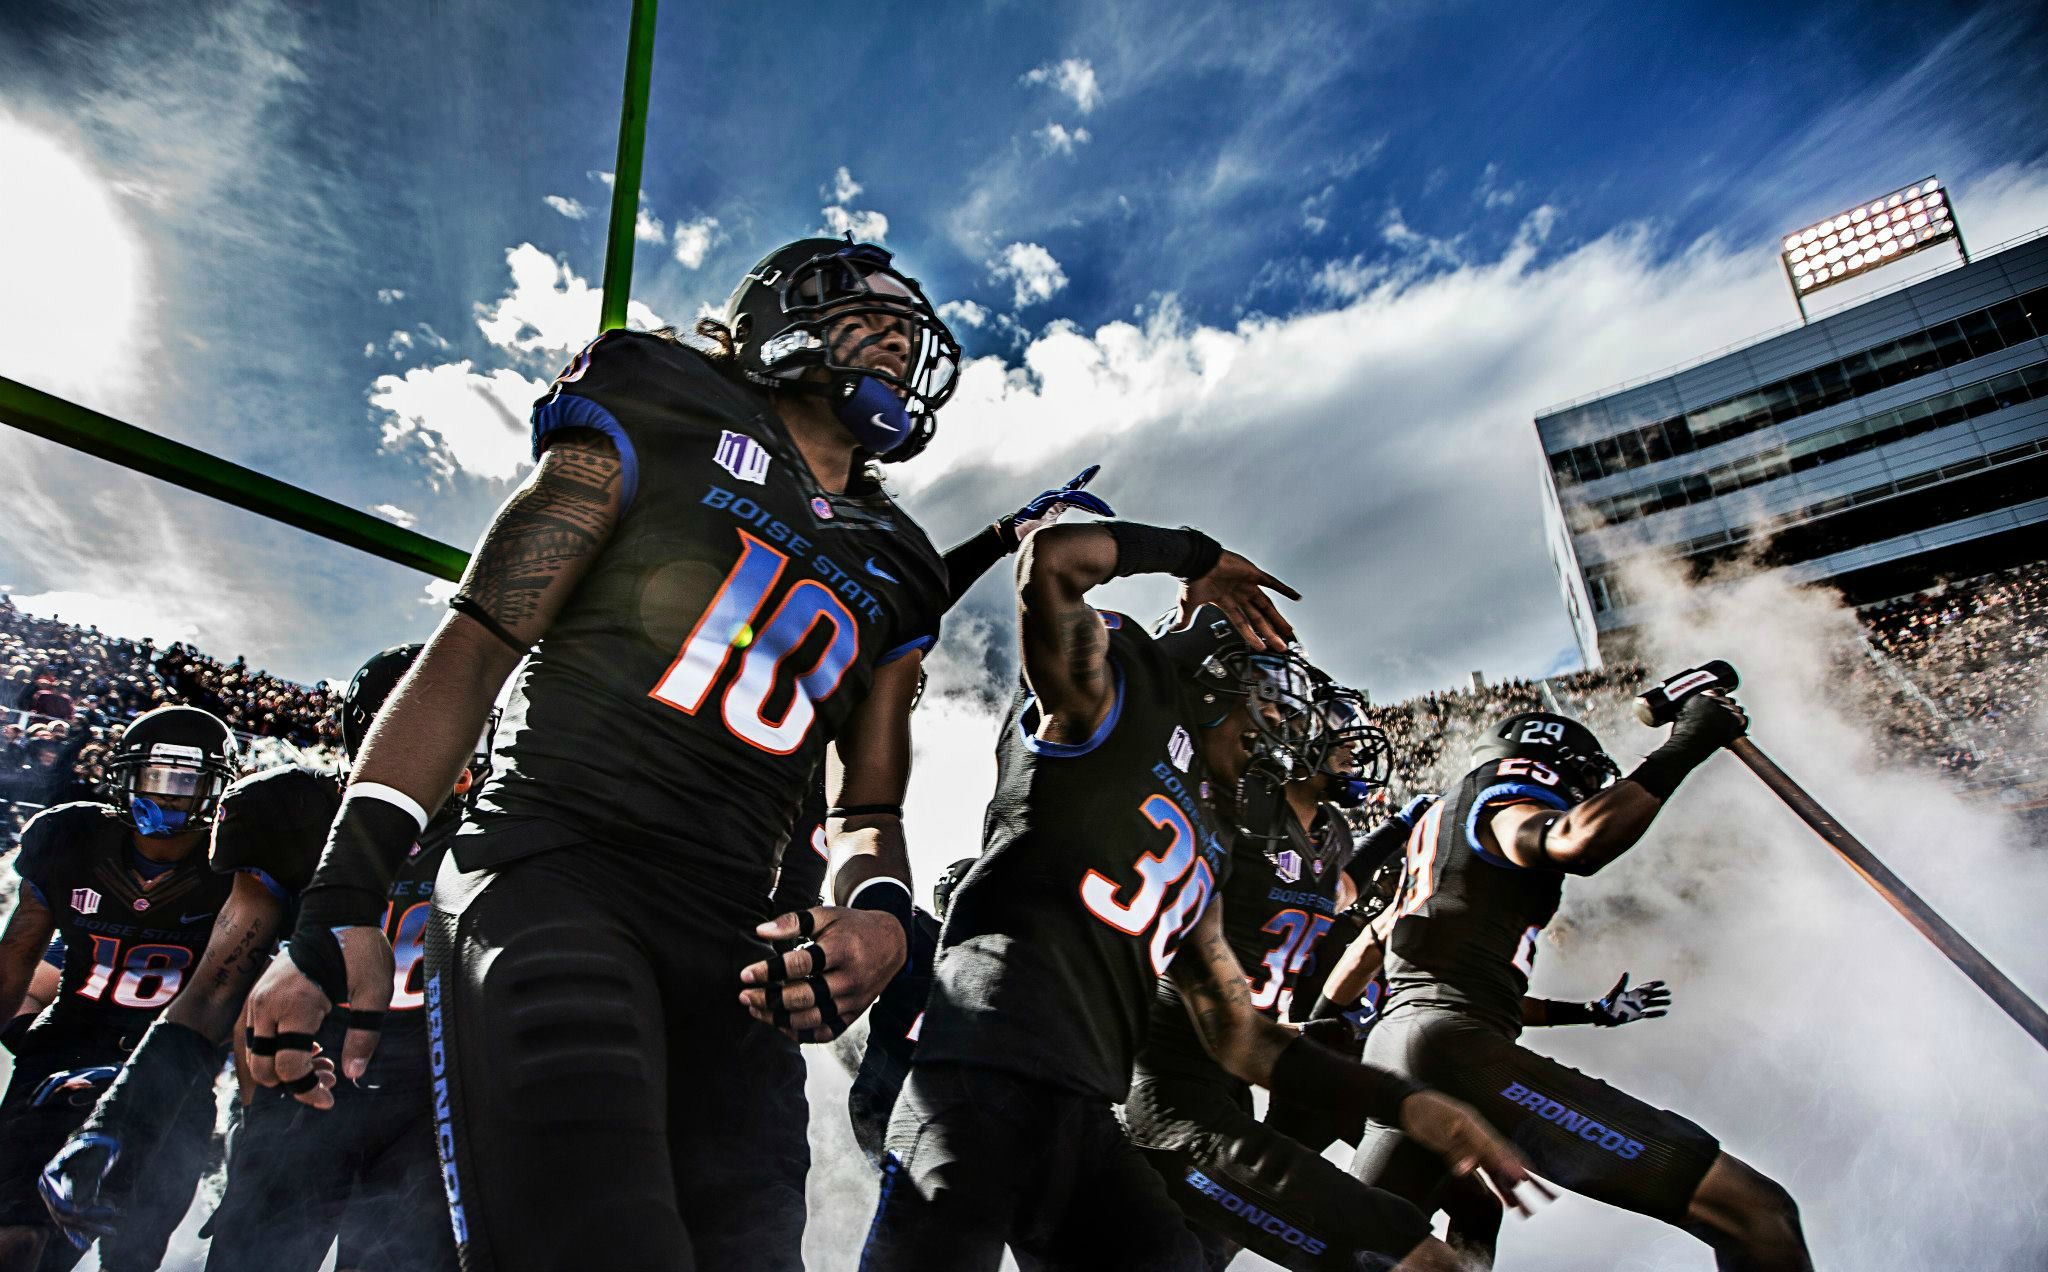 A friend of mine took this photo of the Boise State players ...